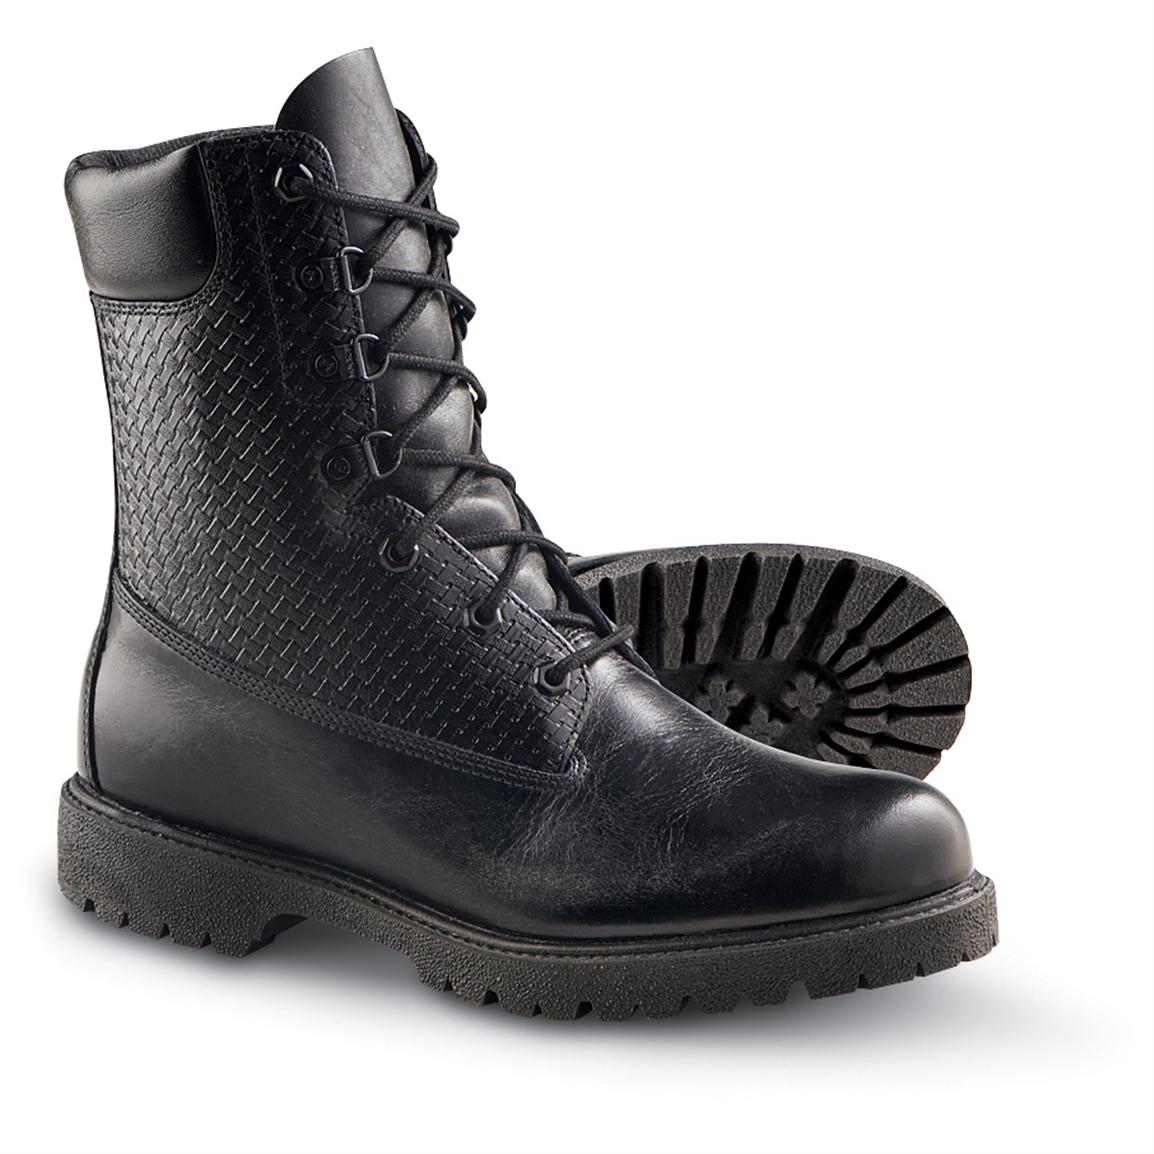 thinsulate combat boots